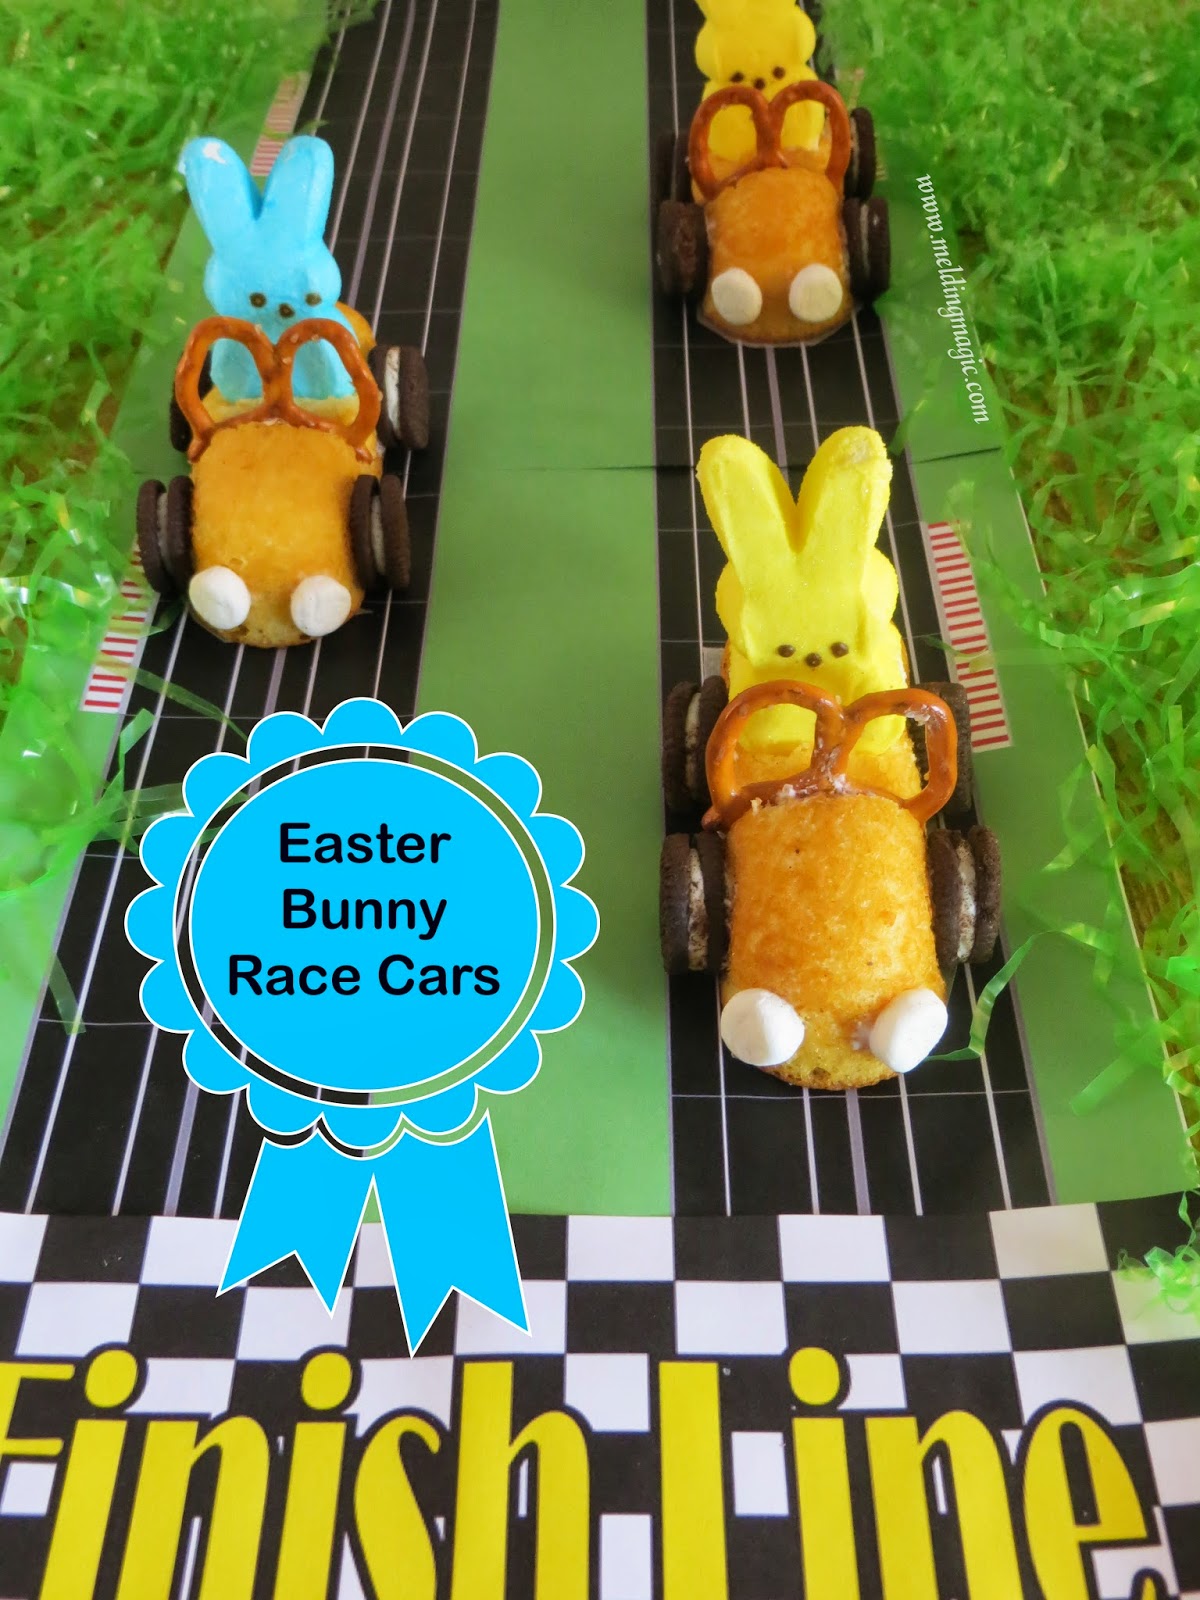 30 of the Best Easter Recipes & DIY Ideas - Roxy's Kitchen - Easter Bunny Race Cars